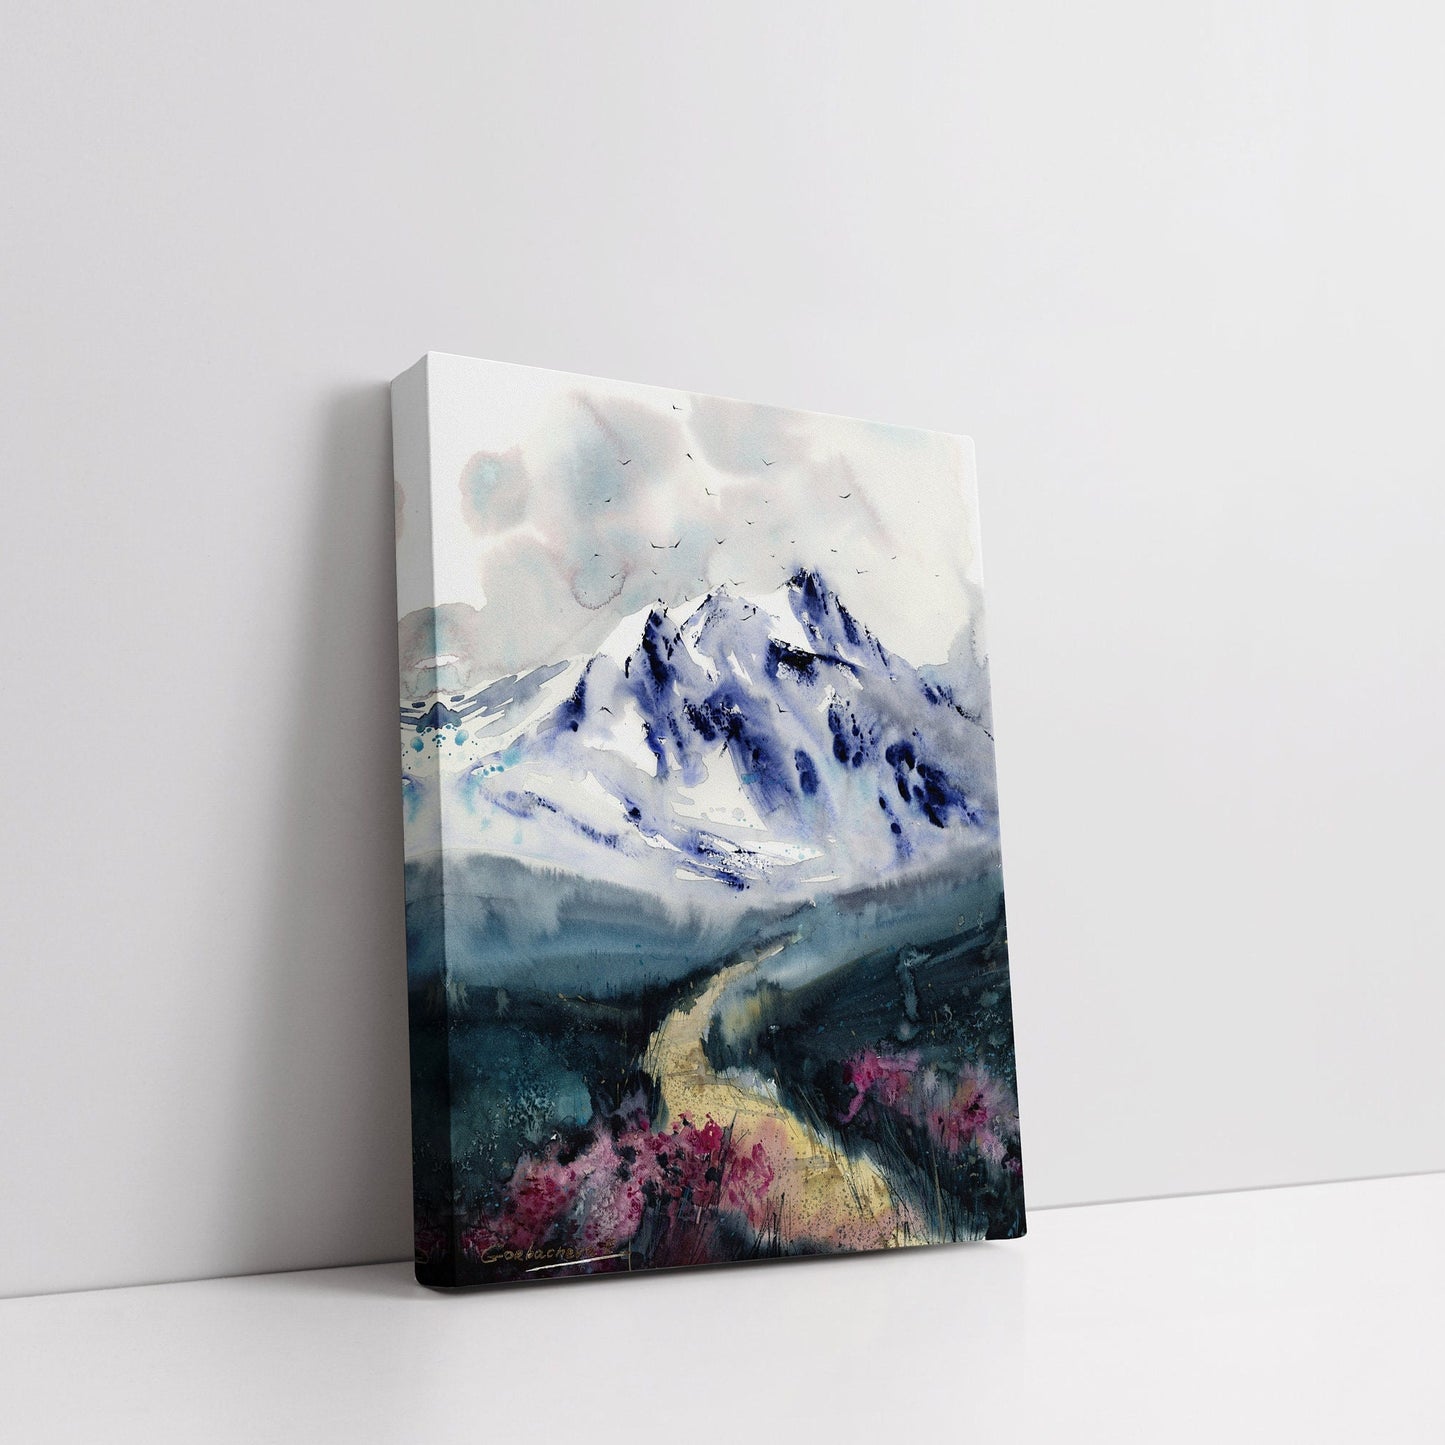 Set of 3 Nature Prints, Modern Wall Art, Abstract Mountain, Blue, Landscape Paintings On Canvas, Decor Above The Sofa